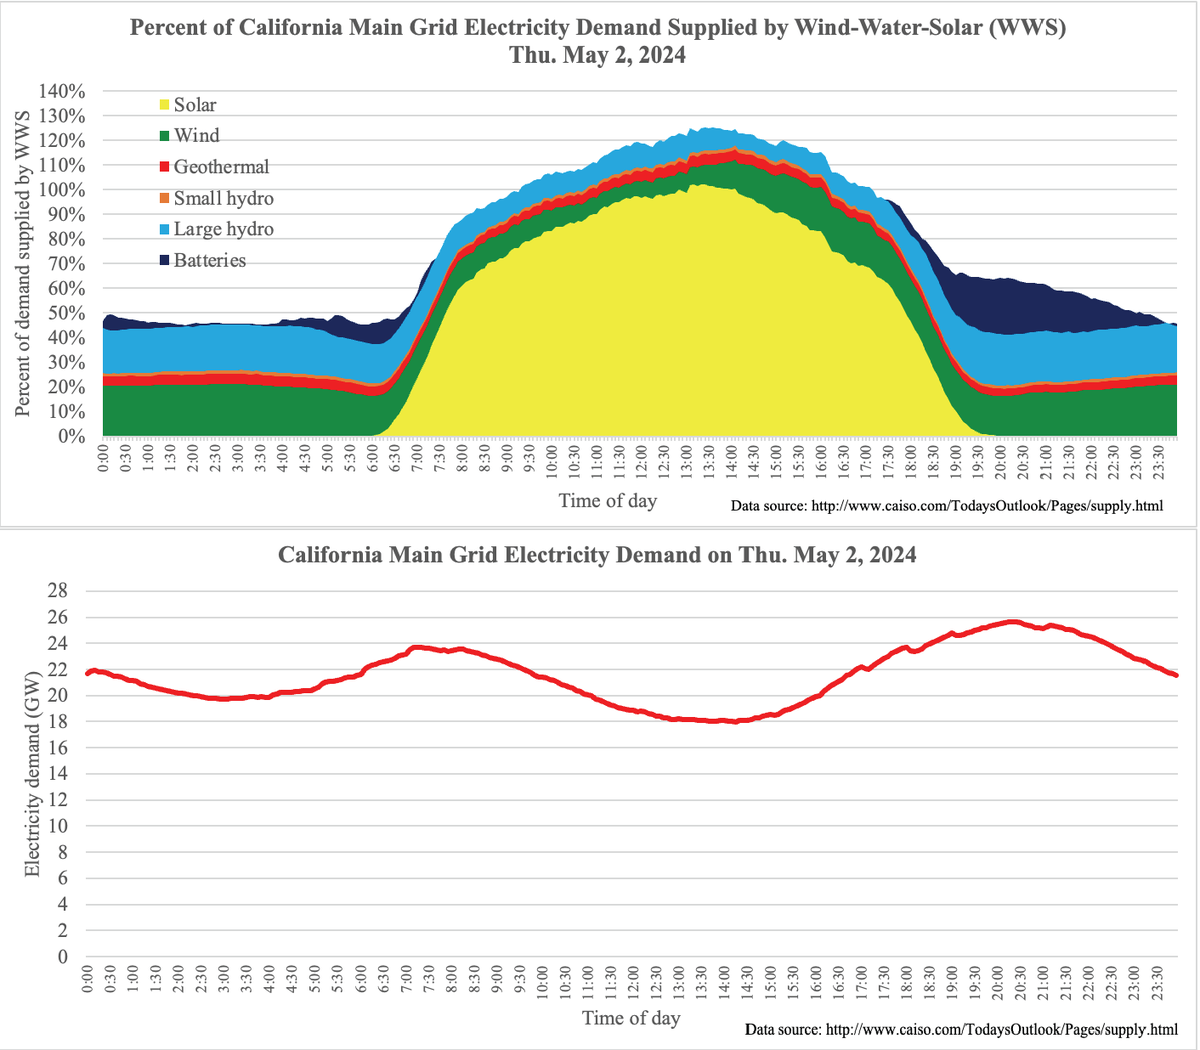 May 2 was the 19th day straight and 48th of 56 where #WindWaterSolar supply exceeded demand on California's grid (for 7.75 h, peaking at 125.3% of demand) Over 56 days/nights, WWS Averaged 4.13 hours/day > 100% of demand Full stats here: web.stanford.edu/group/efmh/jac…